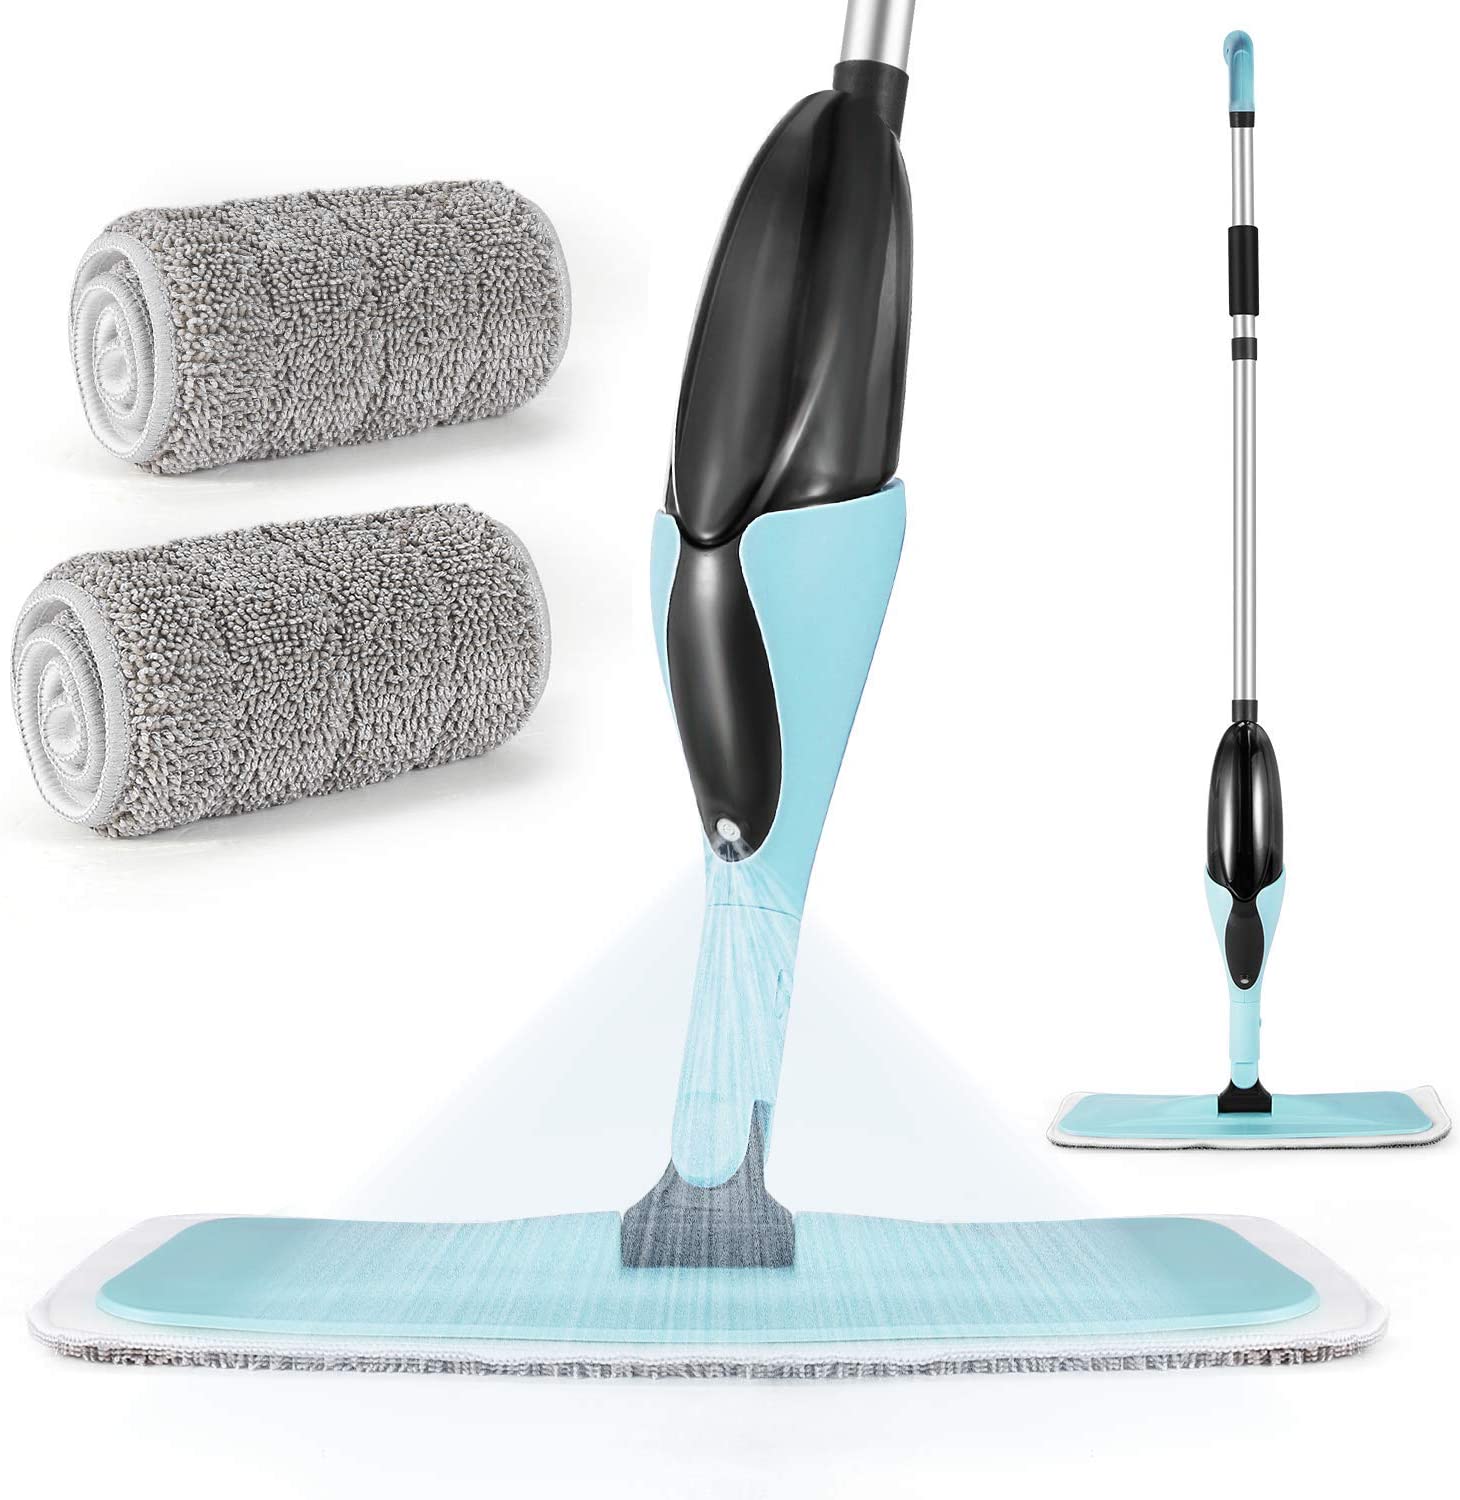 Hardwood Floor Mop with 2 Washable Pads and 500ml Refillable Bottle MP41 360° Microfiber Wet Dry Mop for Home Hardwood/Office Floor Cleaning MOOSOO Spray Mop 